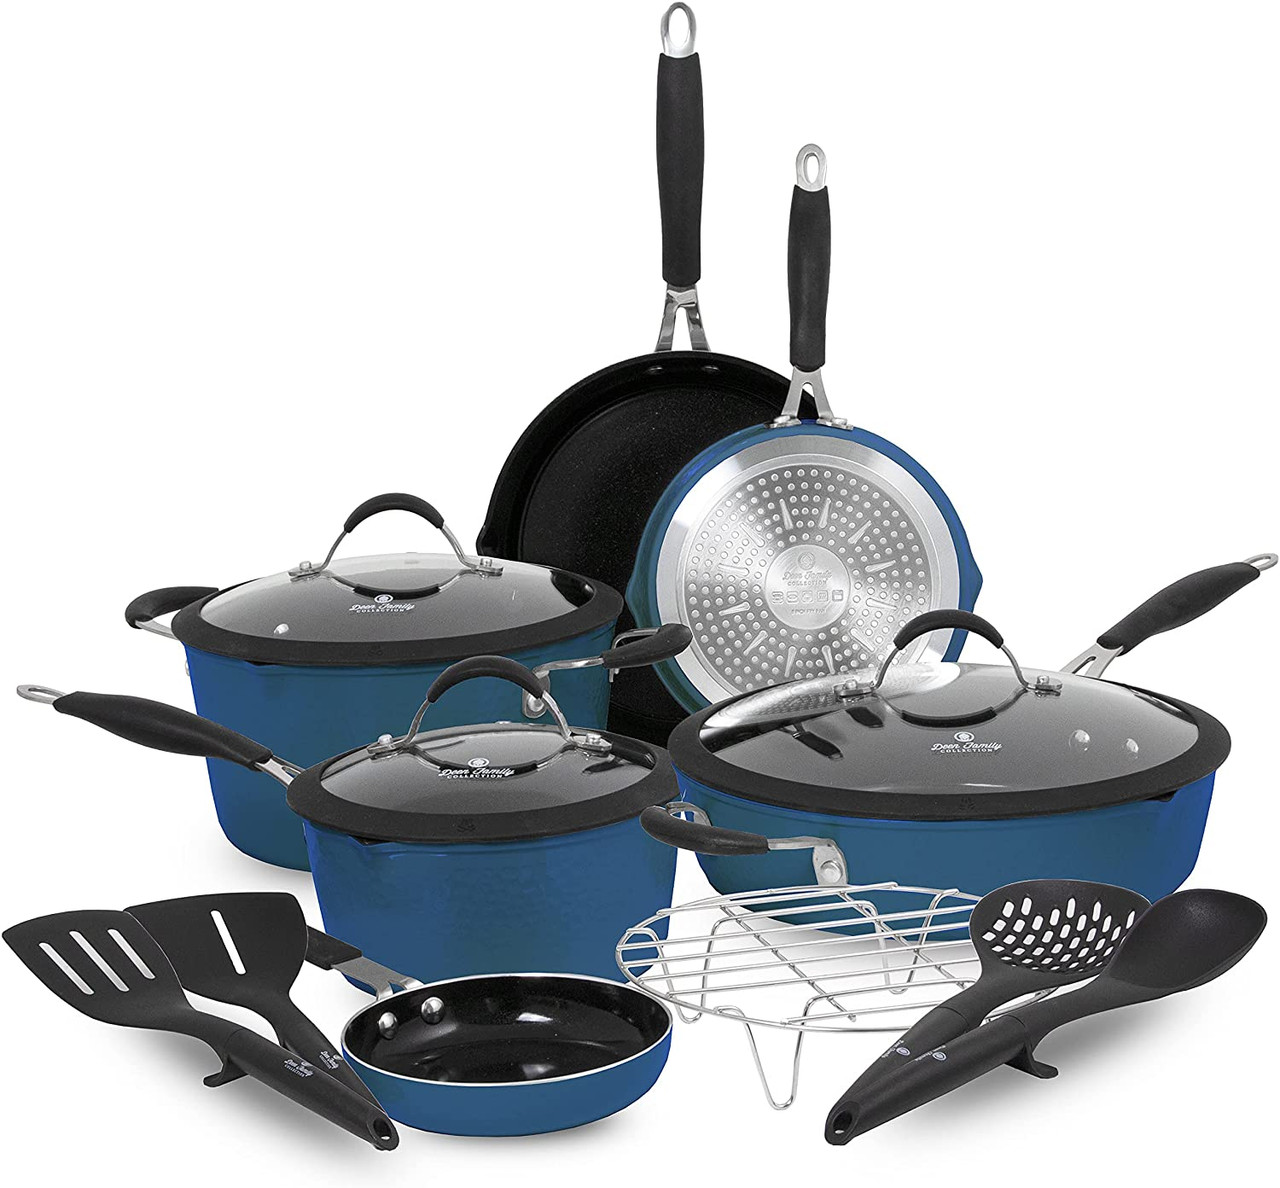 Paula Deen DFCW12SB-RB Family 14 Piece Ceramic Non-Stick Cookware Set 100%  PFOA-Free and Induction Ready, Savannah Blue - Refurbished - Deal Parade